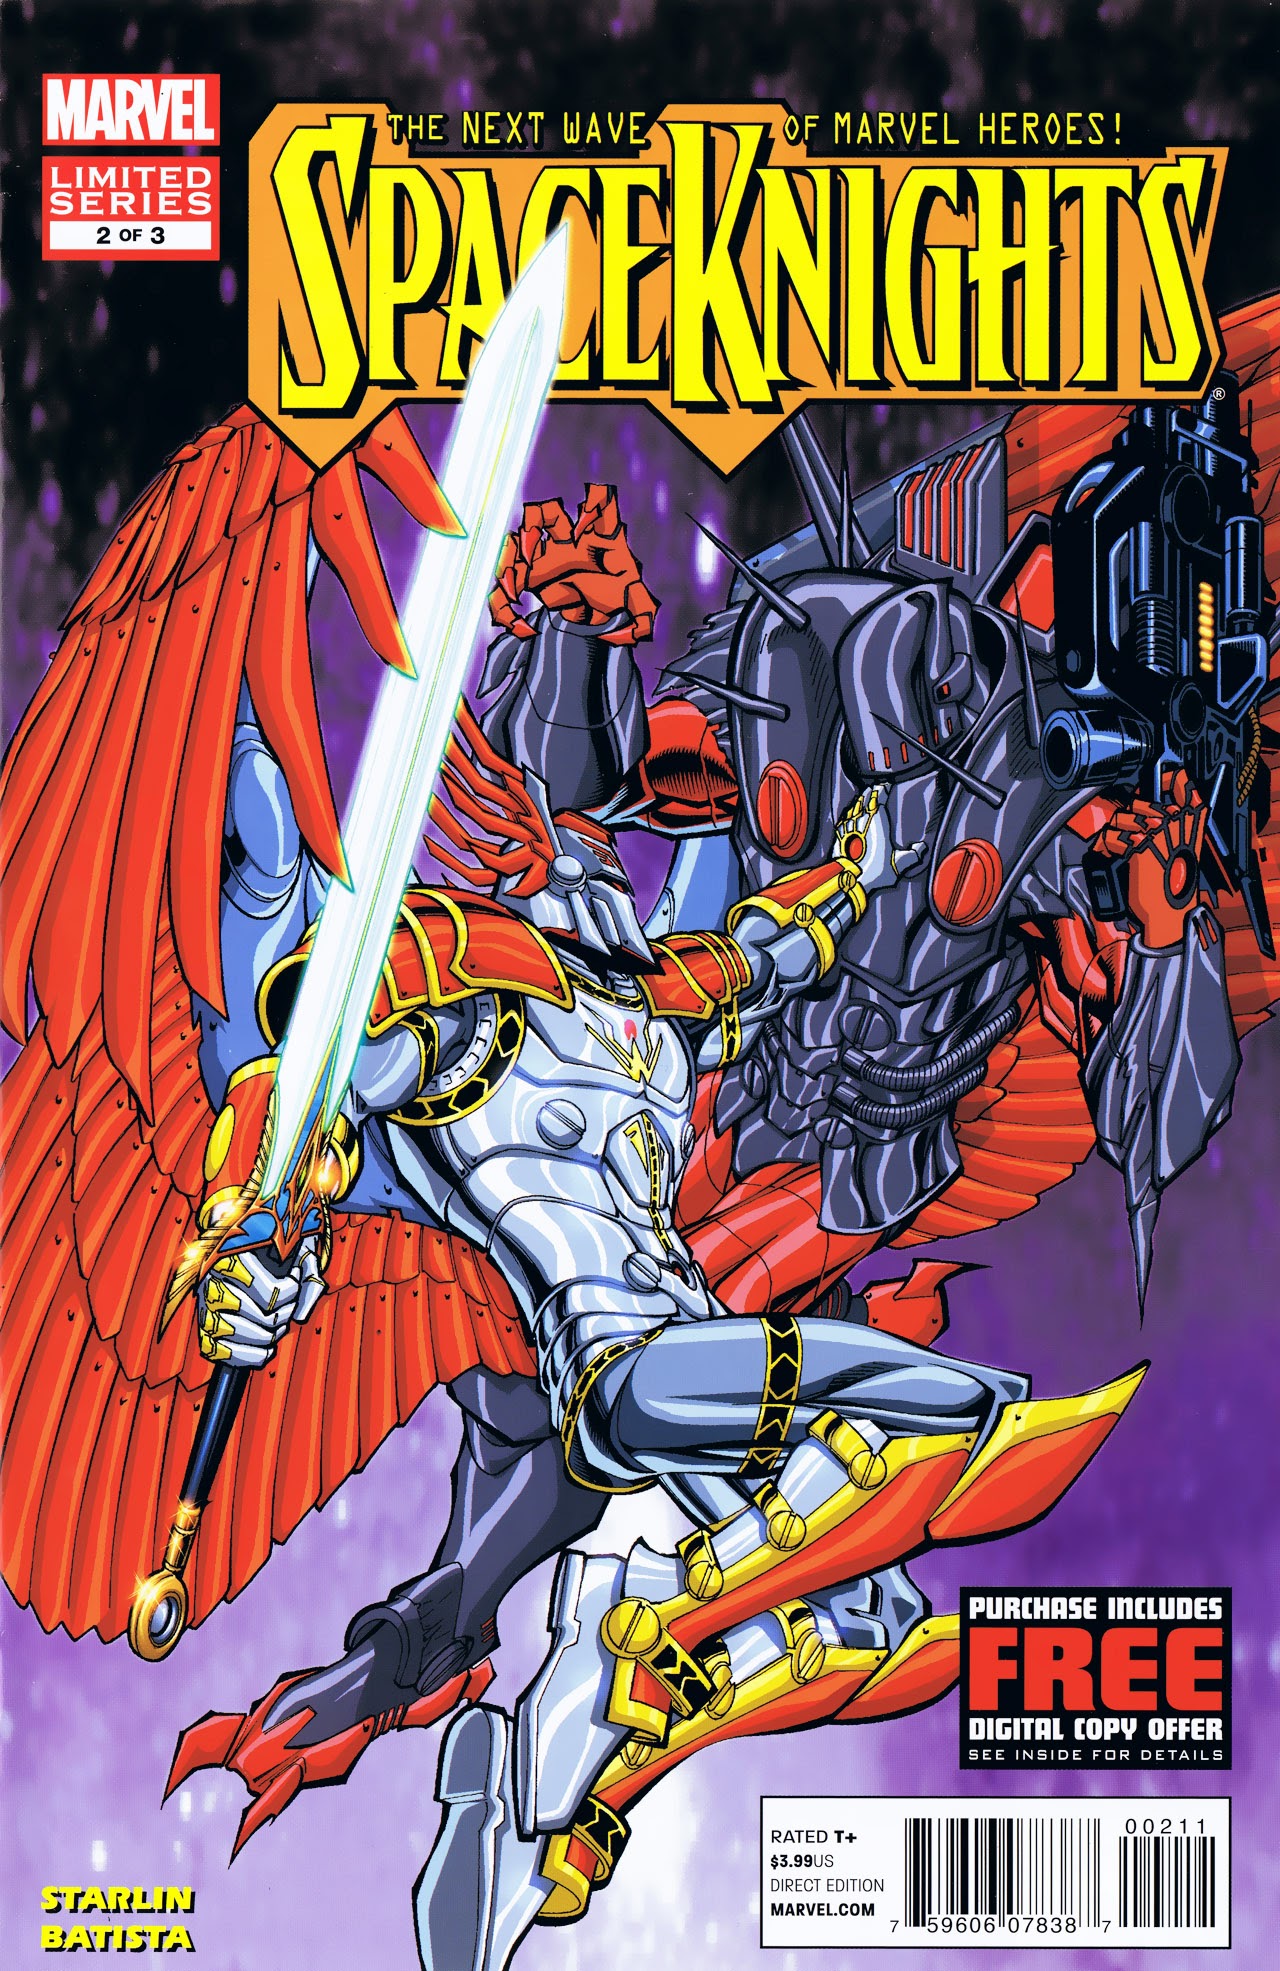 Read online Spaceknights (2012) comic -  Issue #2 - 1